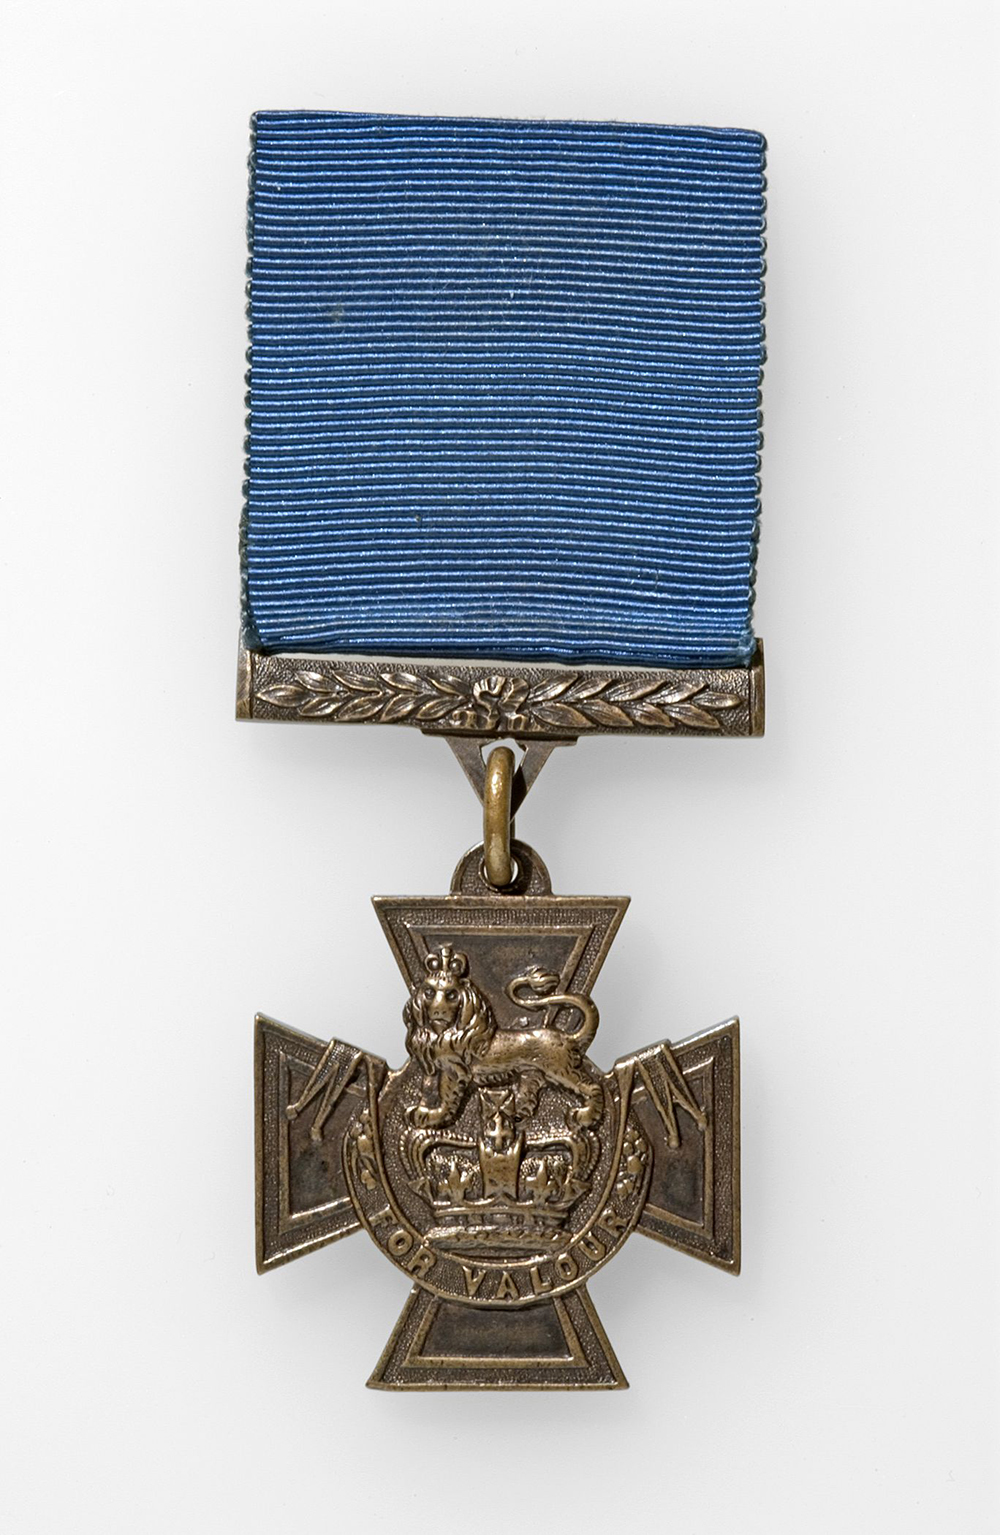 A Victoria Cross brass medal hanging from a royal blue ribbed ribbon.